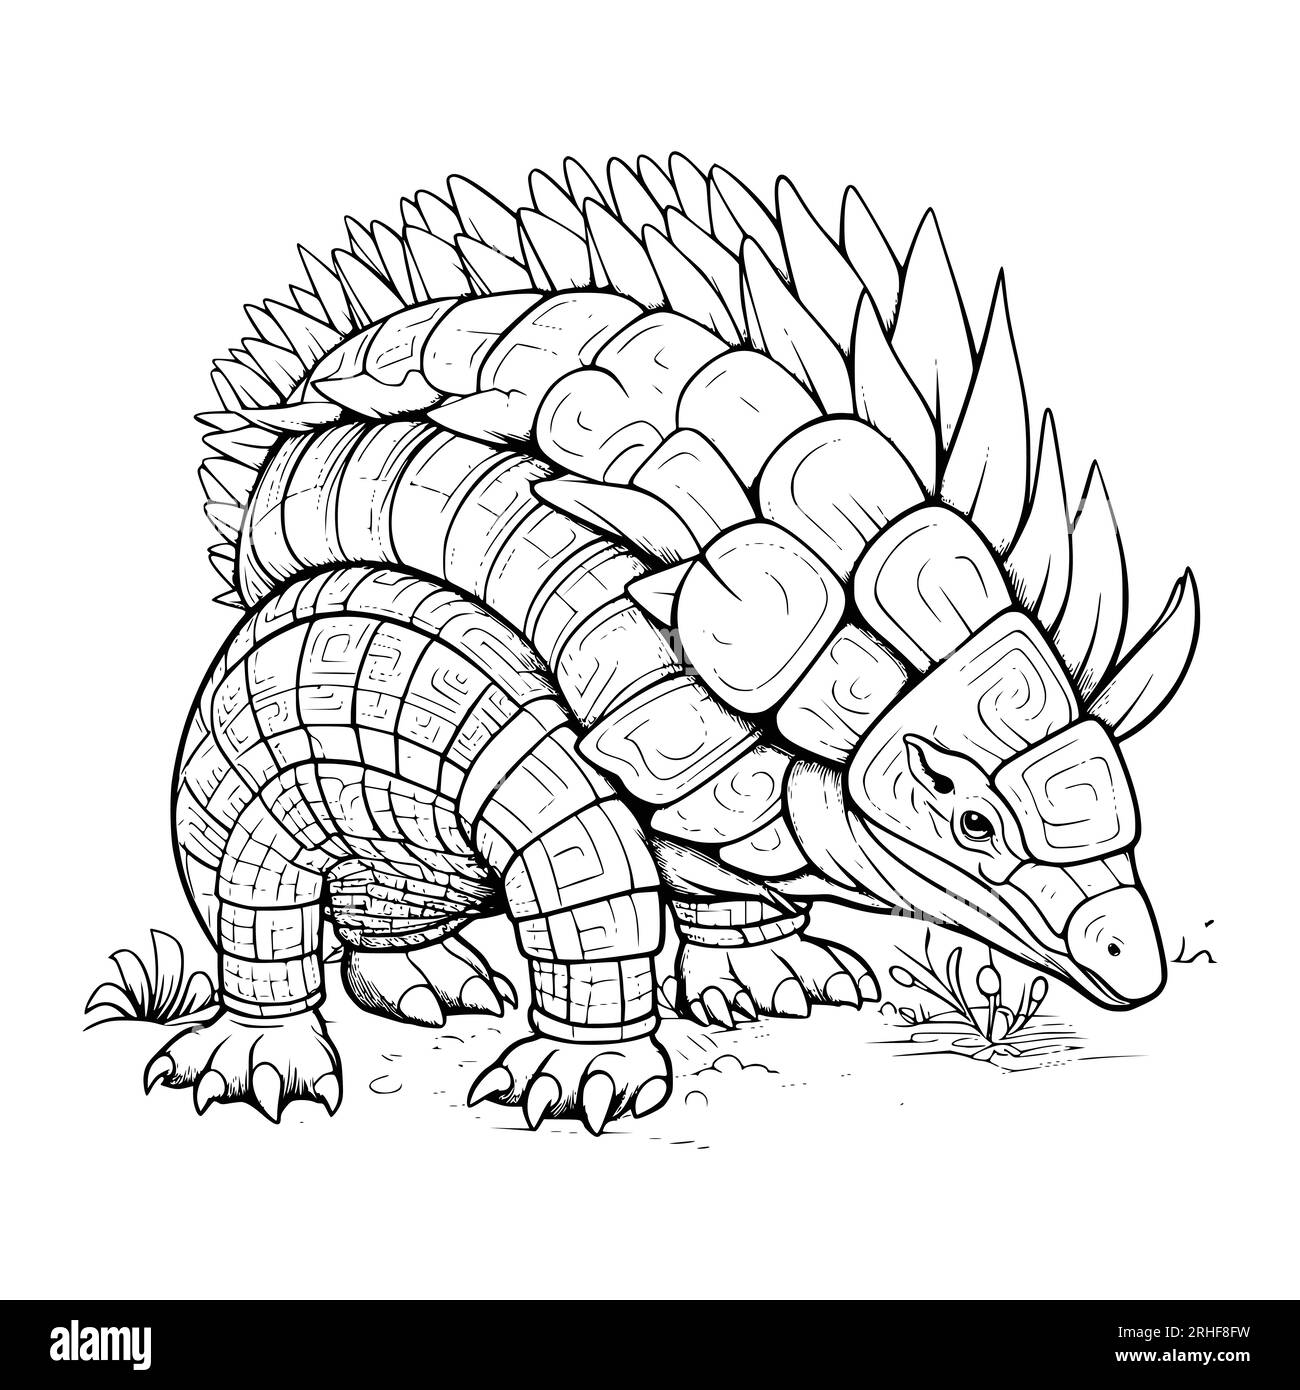 Armadillo Coloring Page For Kids Stock Vector Image & Art - Alamy